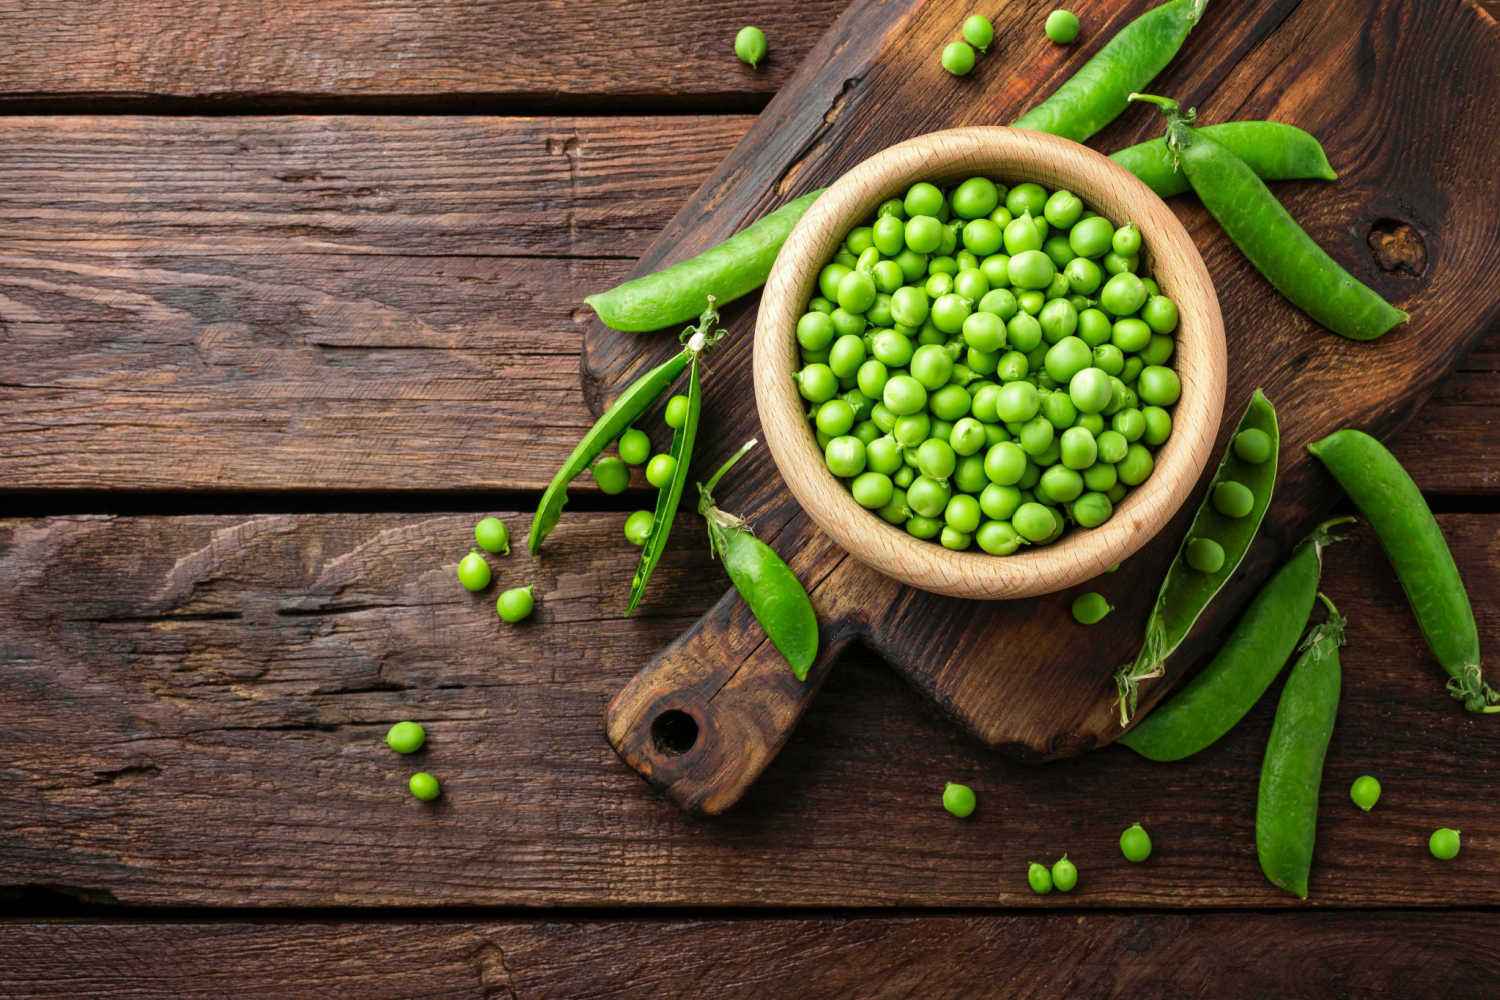 Peas For Babies – When to Introduce, Benefits and Precautions